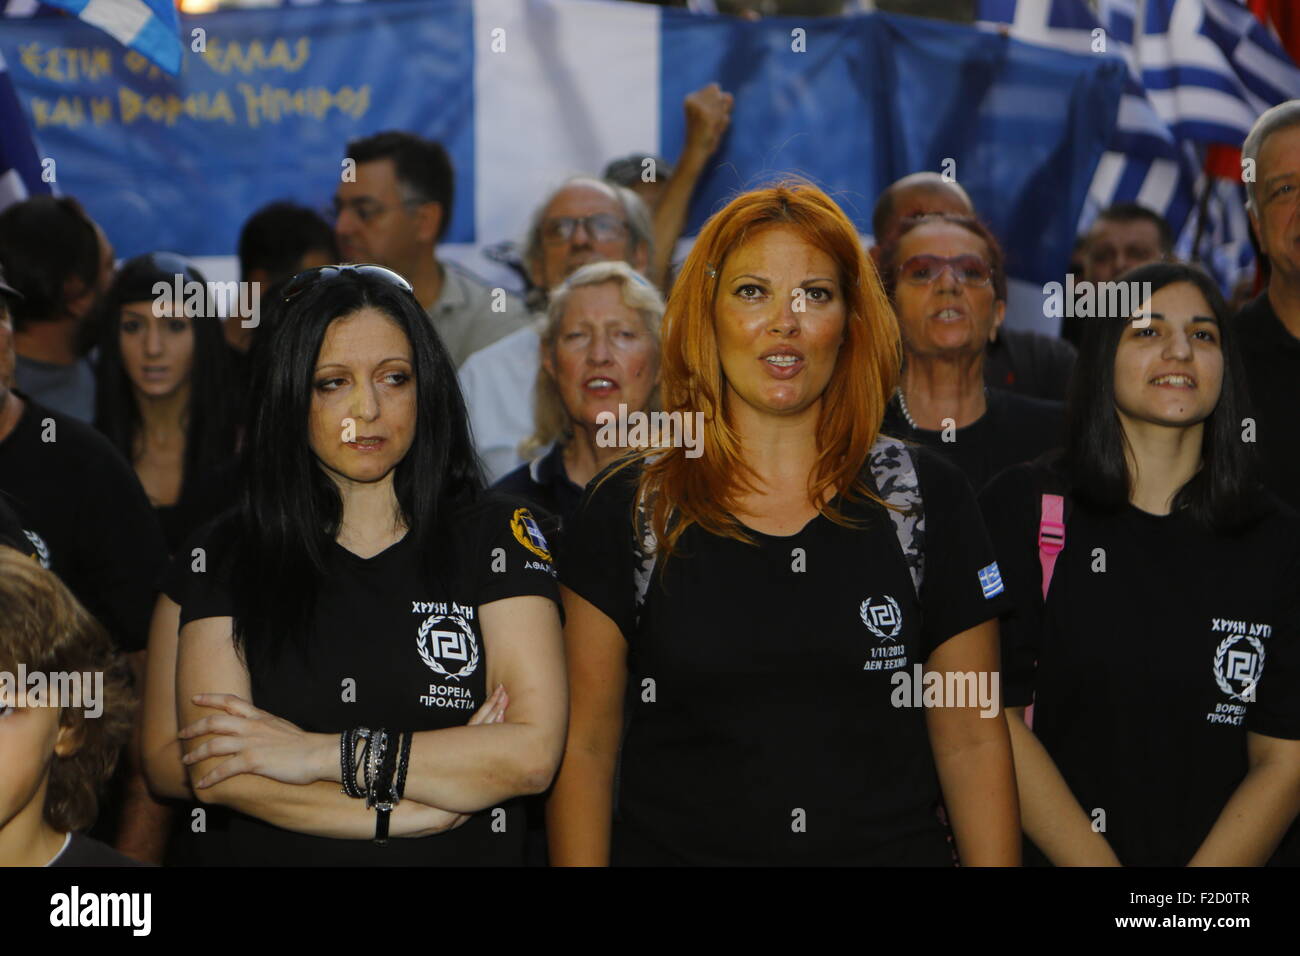 Athens, Greece. 16th September 2015. Golden Dawn supporters listen to a speech at the  election rally in Athens Greek right wing  party Golden Dawn held an election rally in Athens, four days ahead of election day. The party hopes to gain enough seats in the election to become the third latest party in the Greek Parliament. Credit:  Michael Debets/Alamy Live News Stock Photo